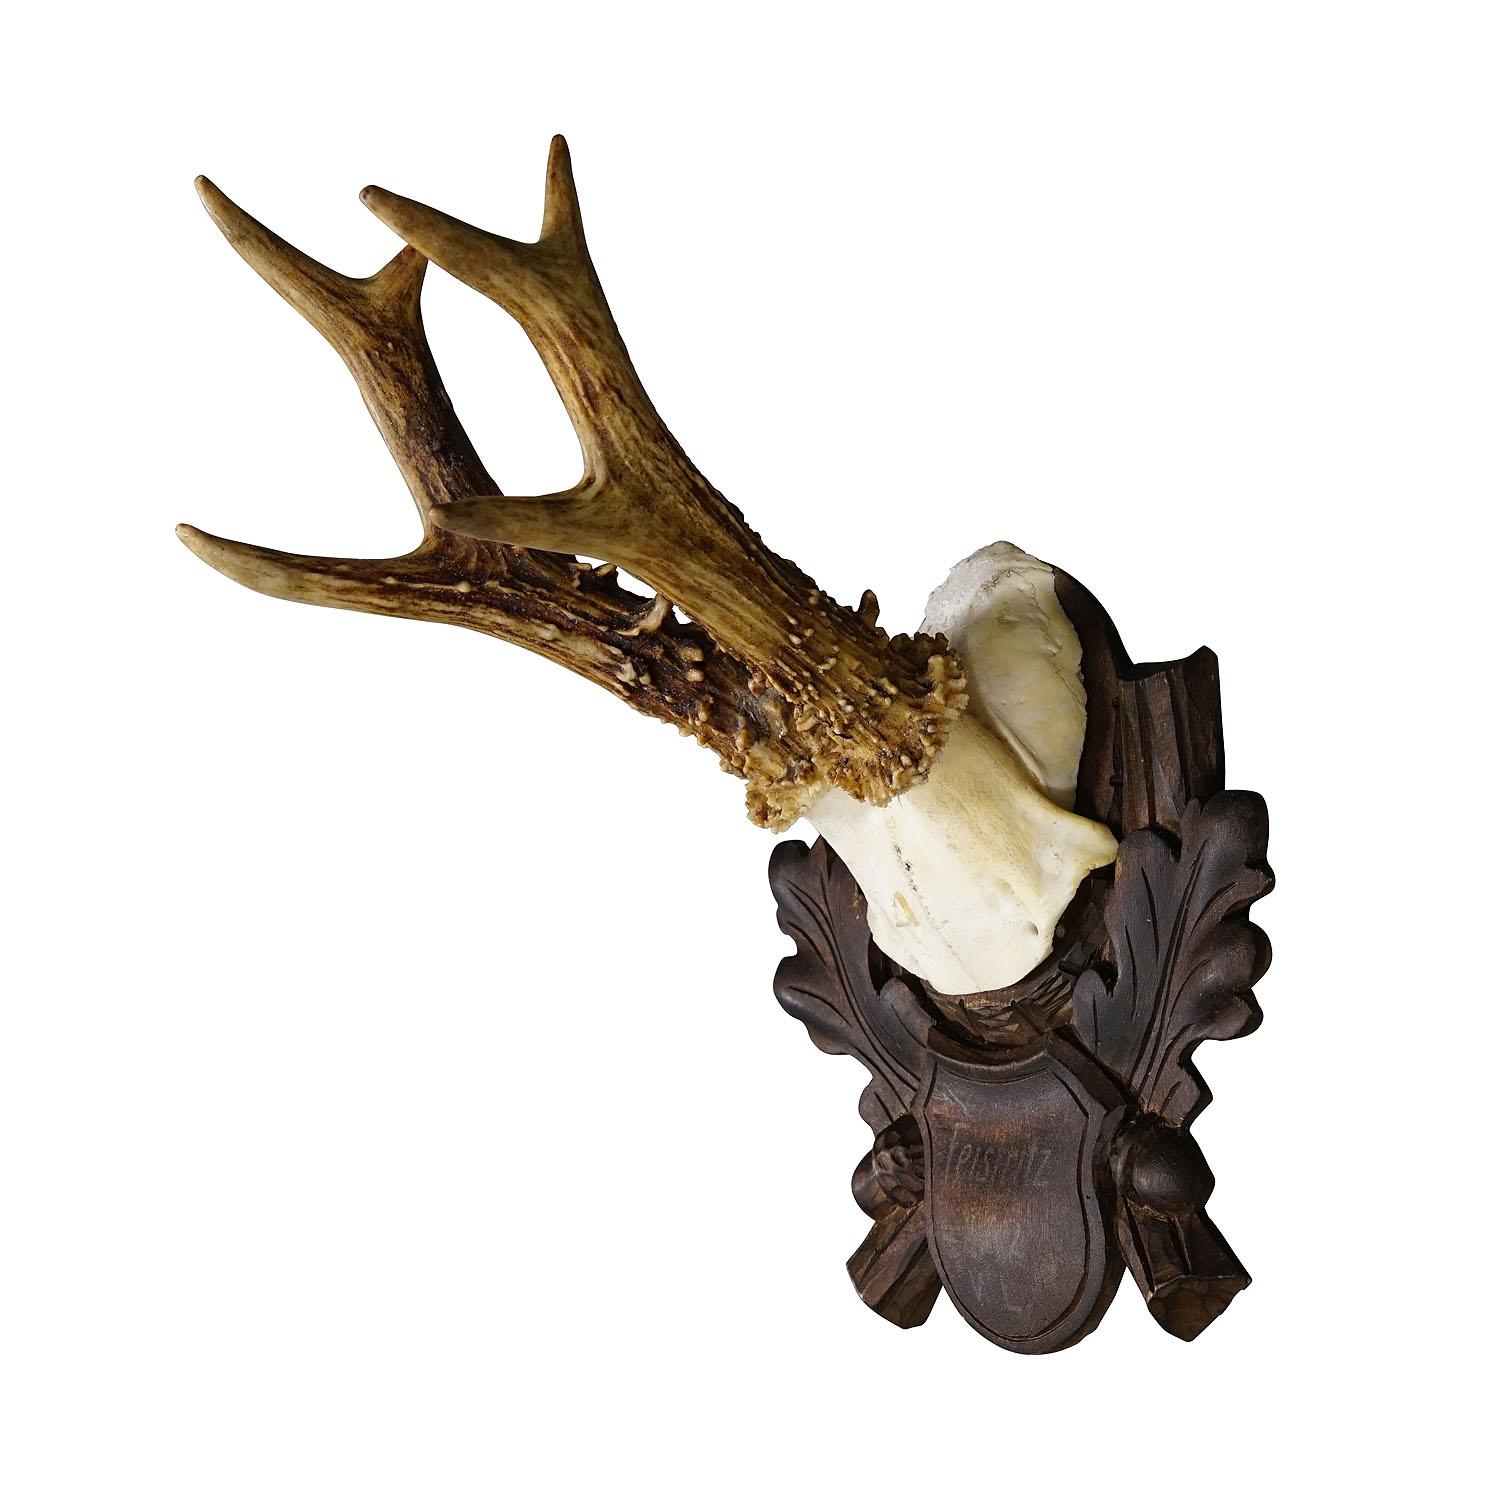 Black Forest Vintage Roe Deer Trophy on Carved Plaque 1942

A great vintage roe deer (Capreolus capreolus) trophy on a wooden carved plaque. The plaque features a handpainted inscription stating place and date of the hunt. The trophy was shot in